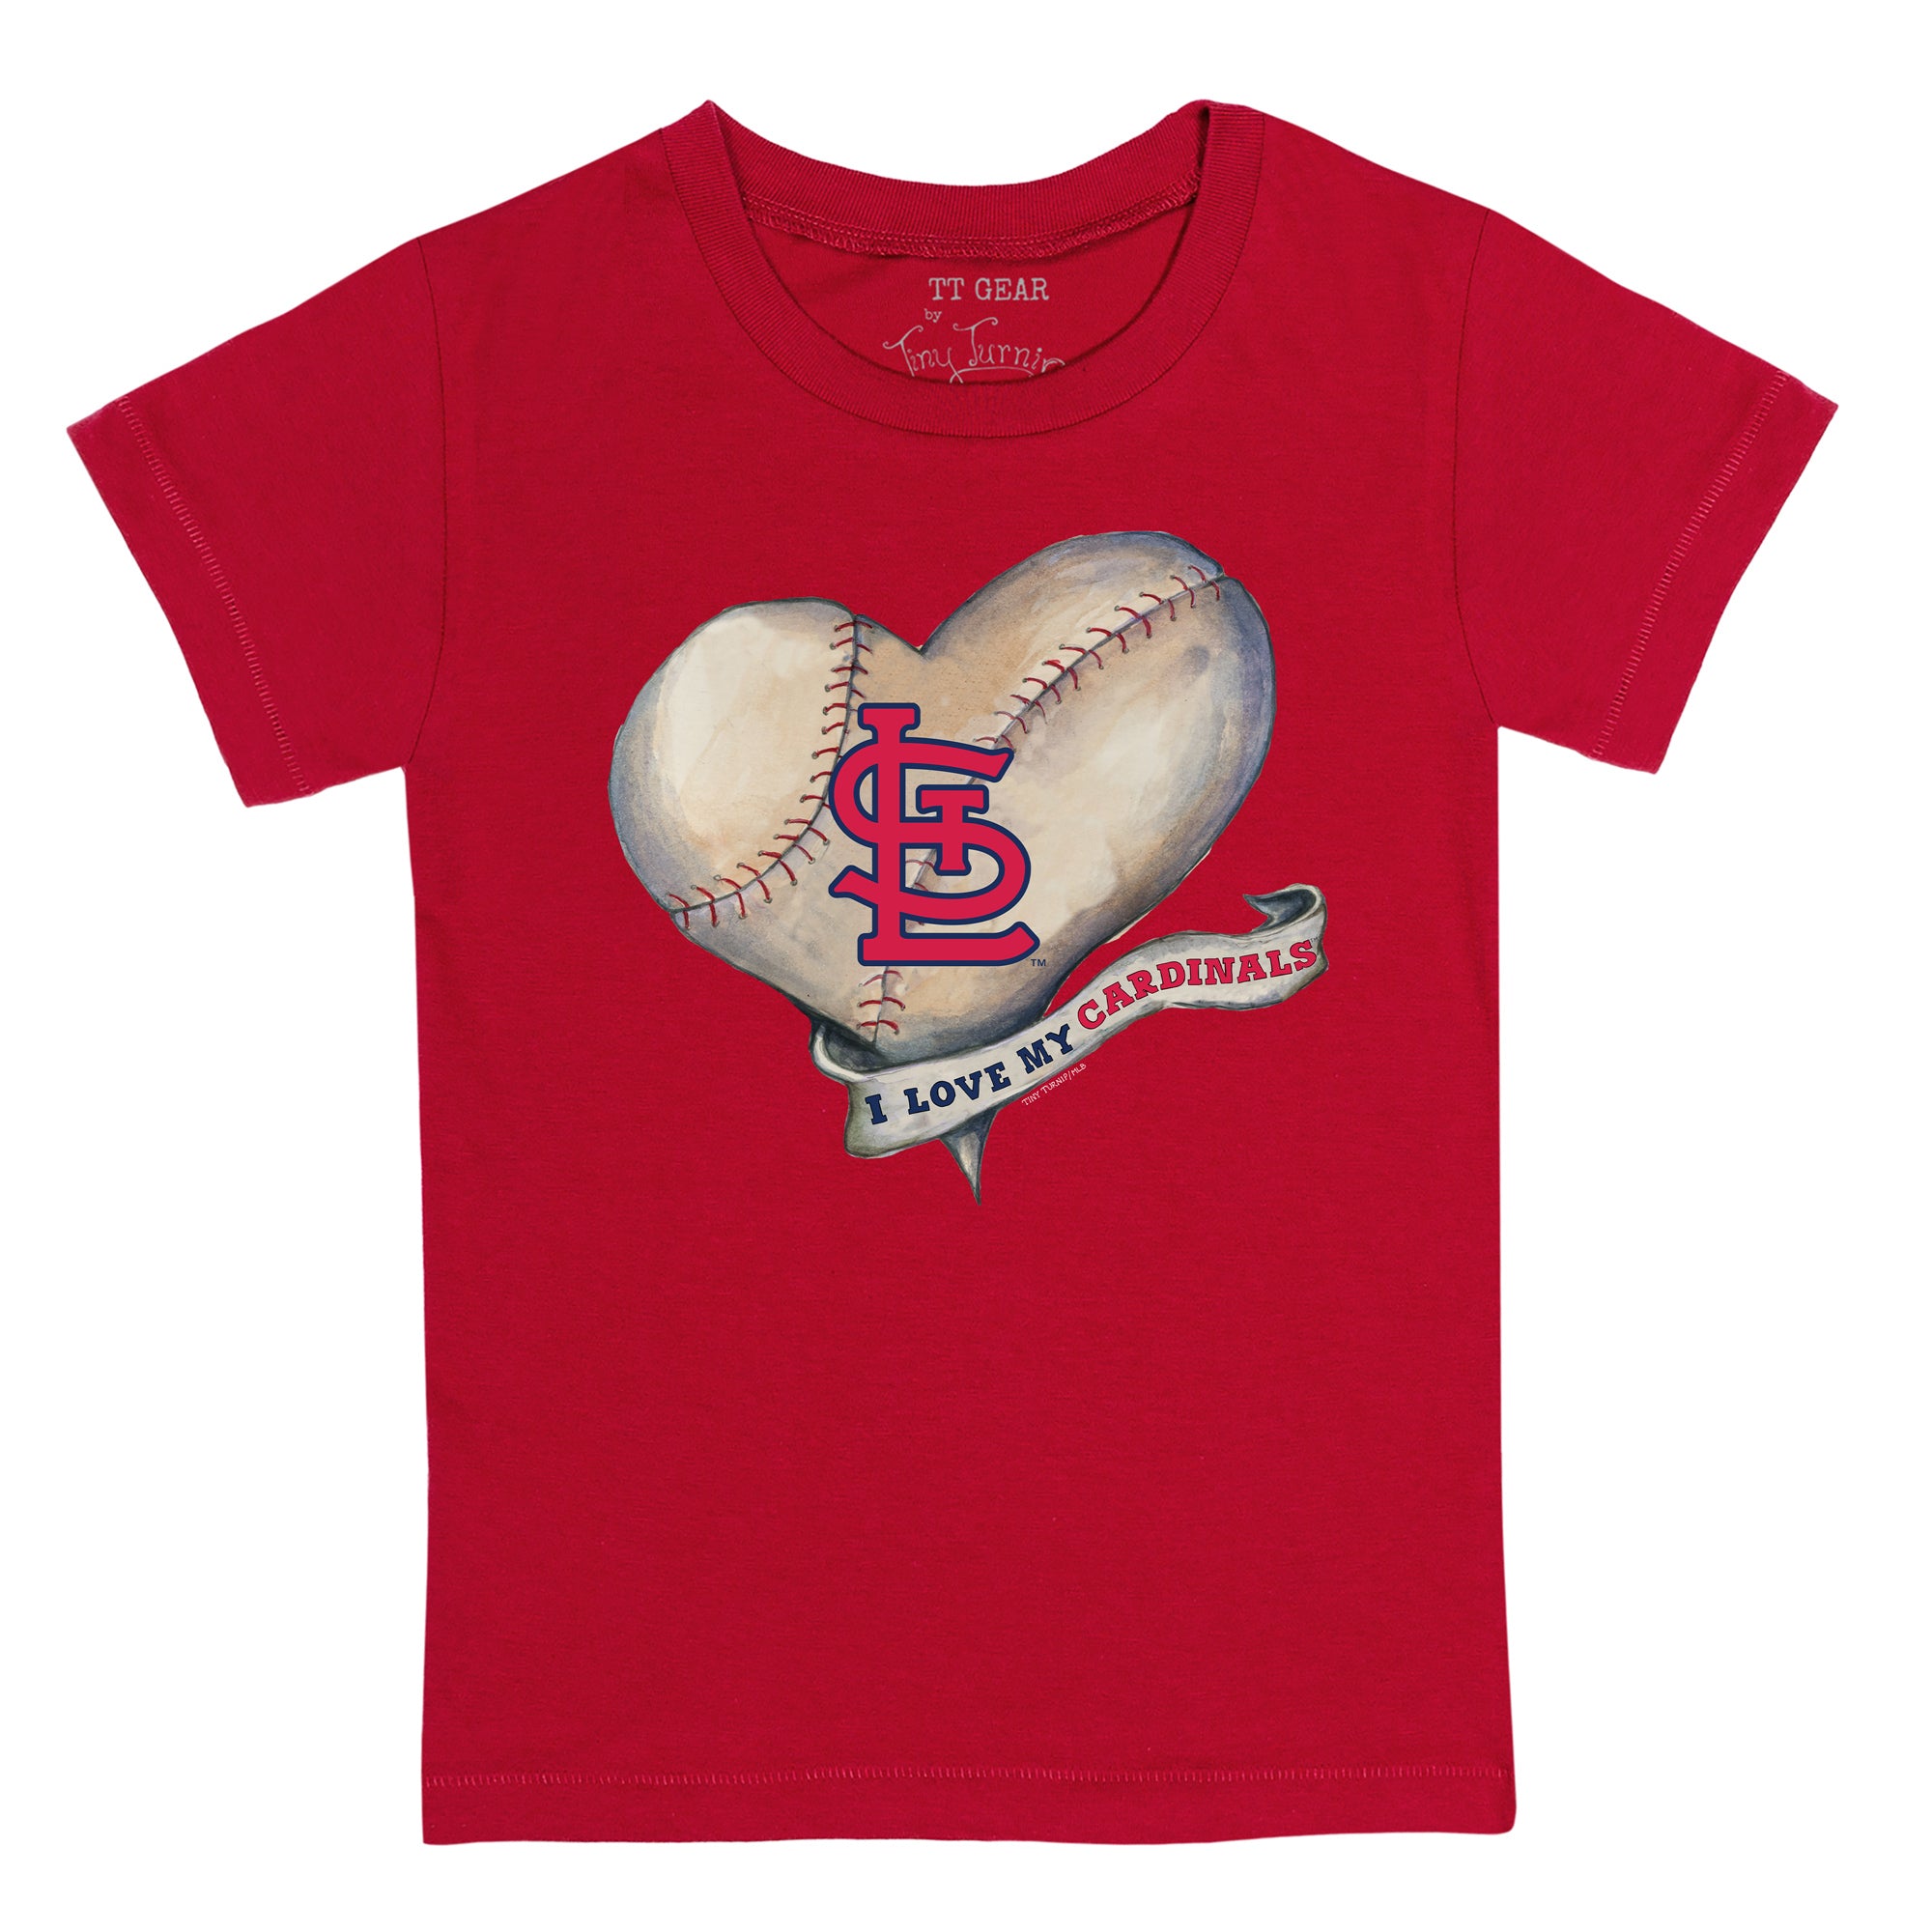 Toddler Tiny Turnip White St. Louis Cardinals Heart Banner T-Shirt Size:3T